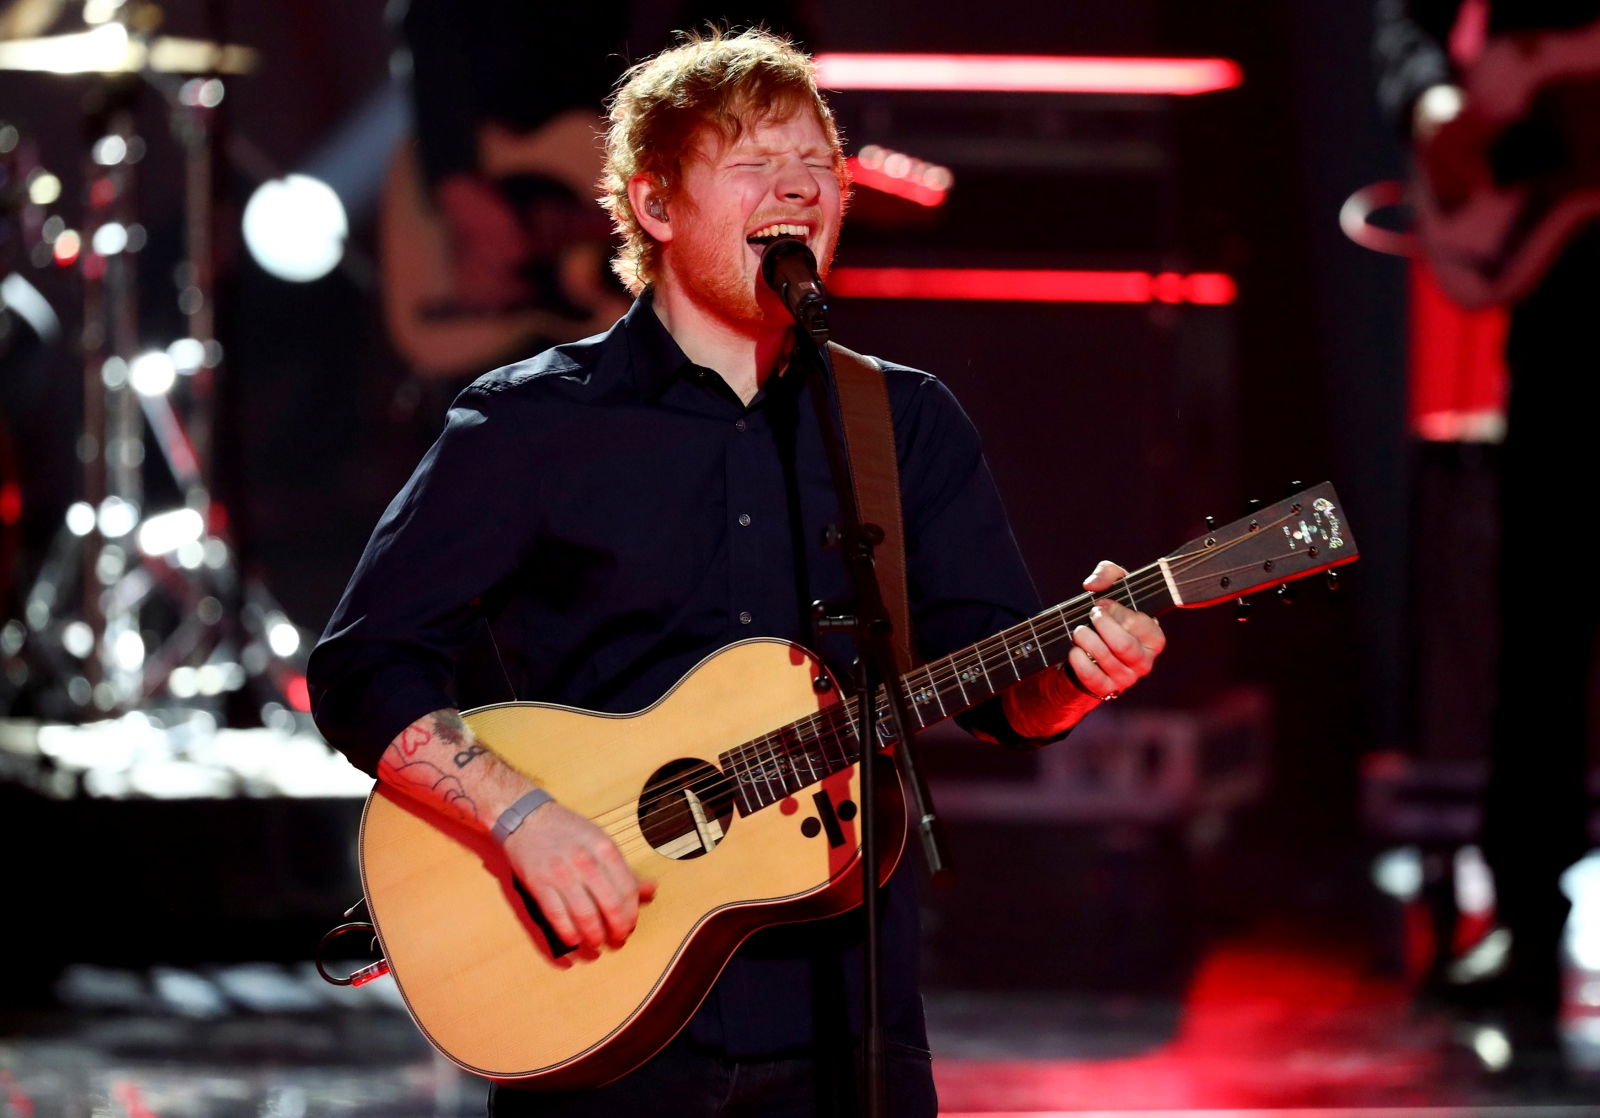 Should we scrap the music charts after Ed Sheeran/Harry Styles debacle? Expert weighs in